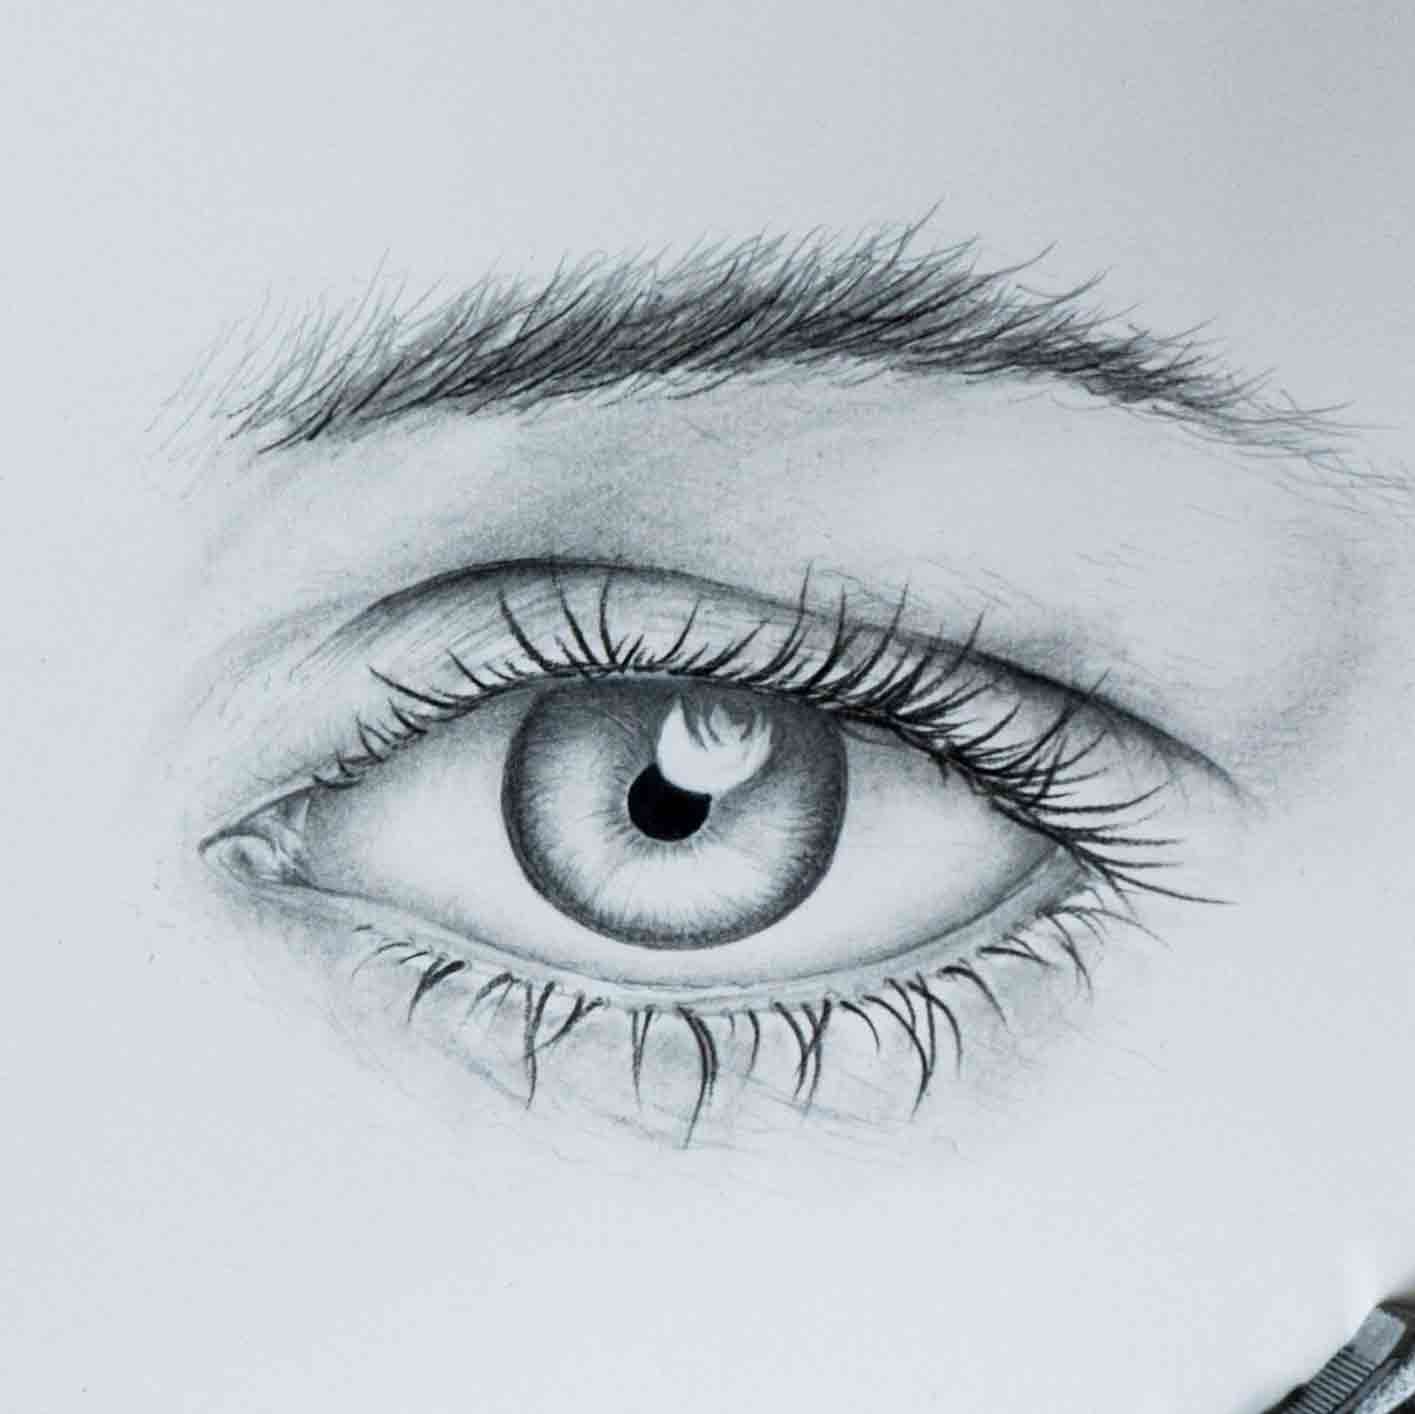 Free Pencil Drawing Tutorial - Learn Eye Drawing and Pencil Shading | Udemy-saigonsouth.com.vn